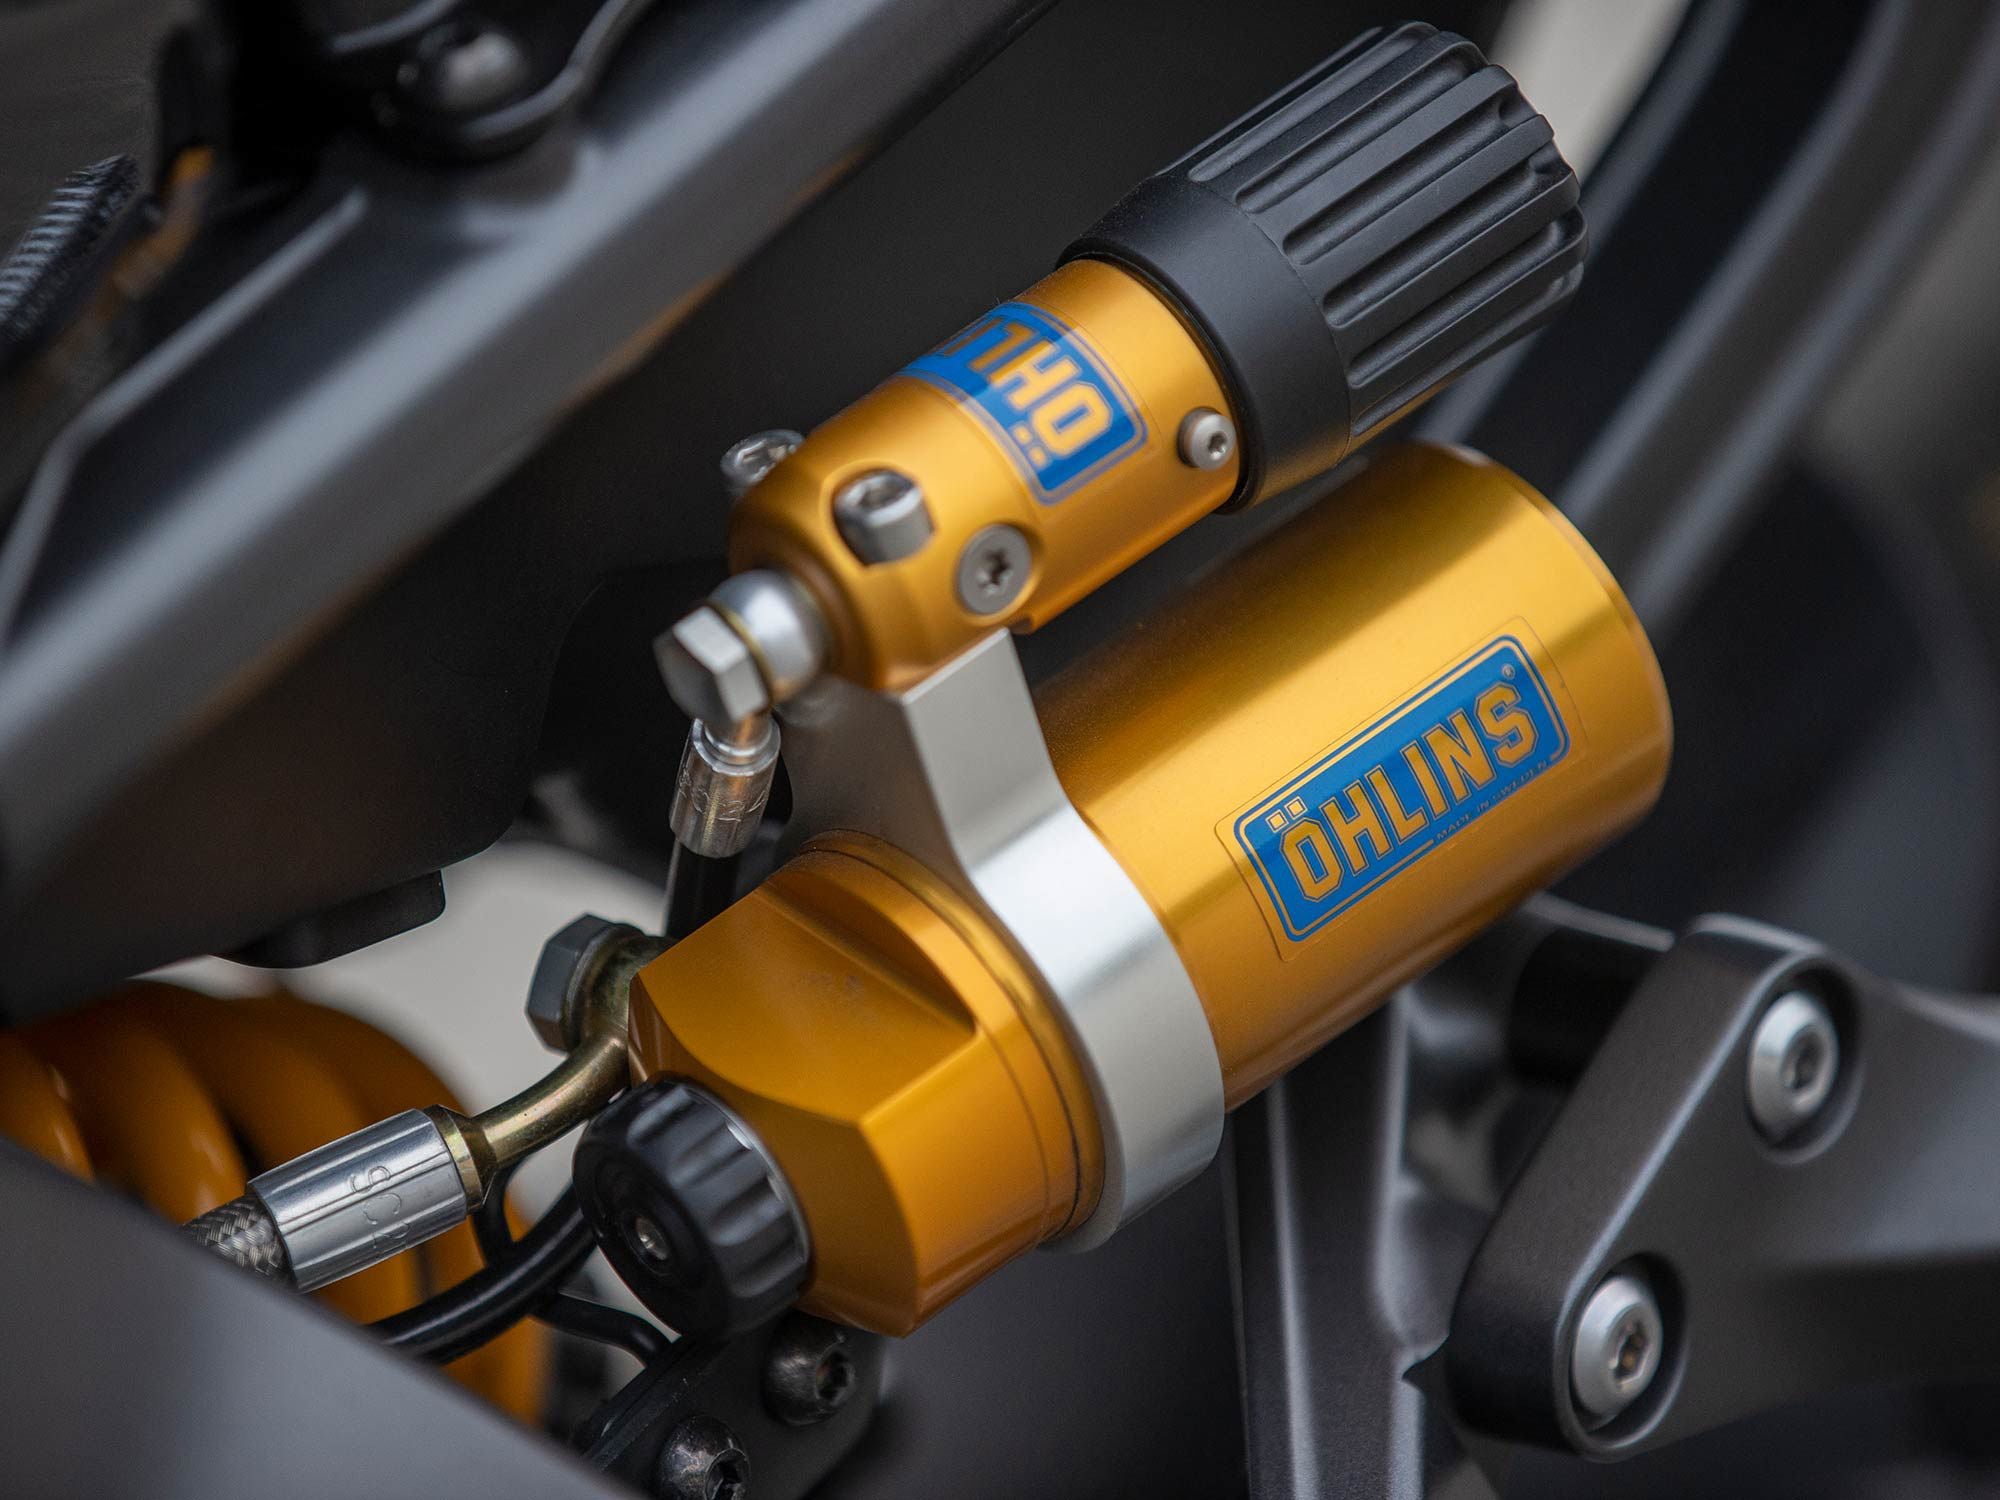 A fully adjustable Öhlins shock replaces the single-way-adjustable rear shock found on the standard MT-09.